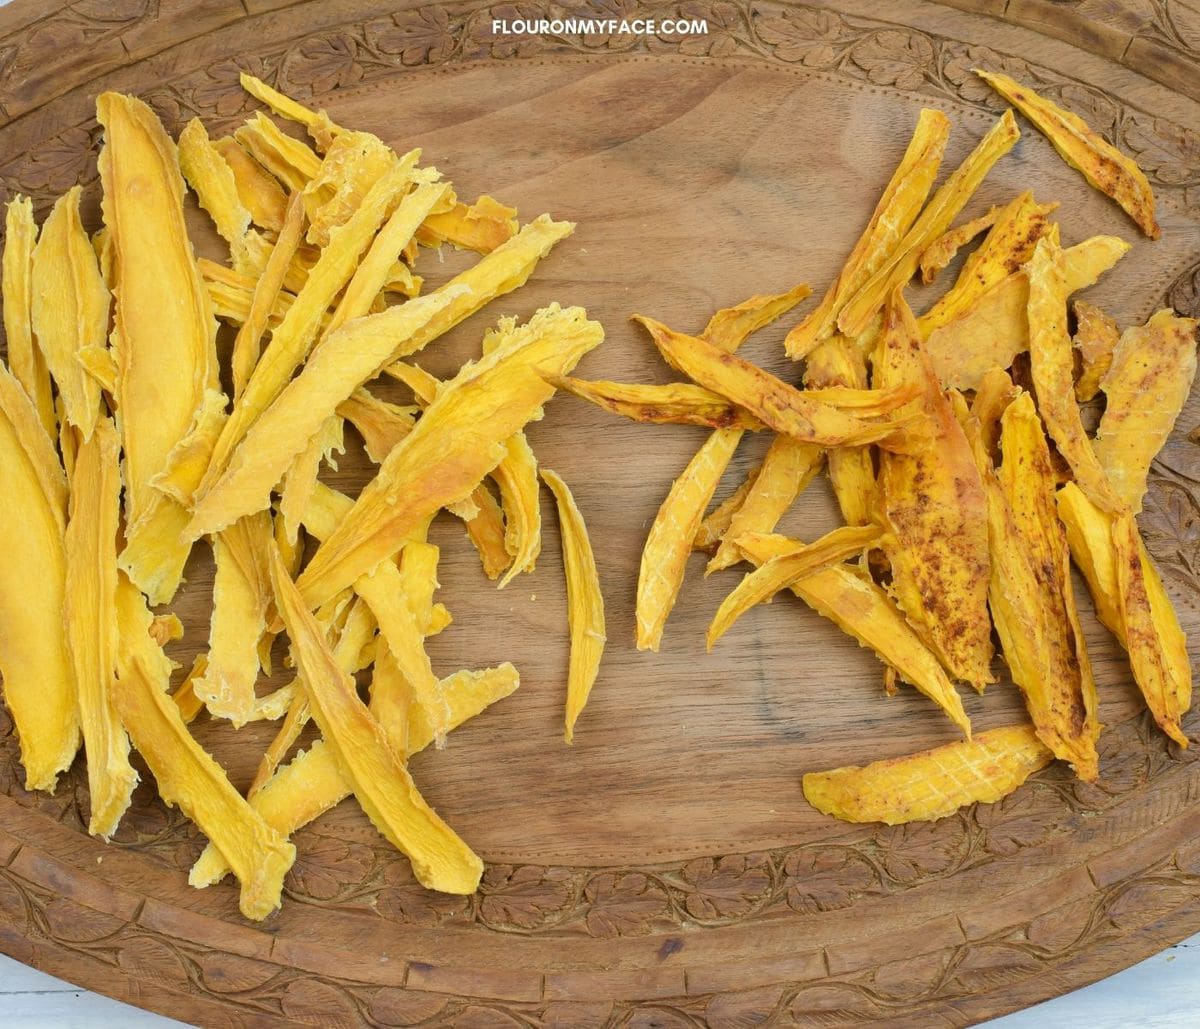 Dried mango pieces on a wooden serving tray.